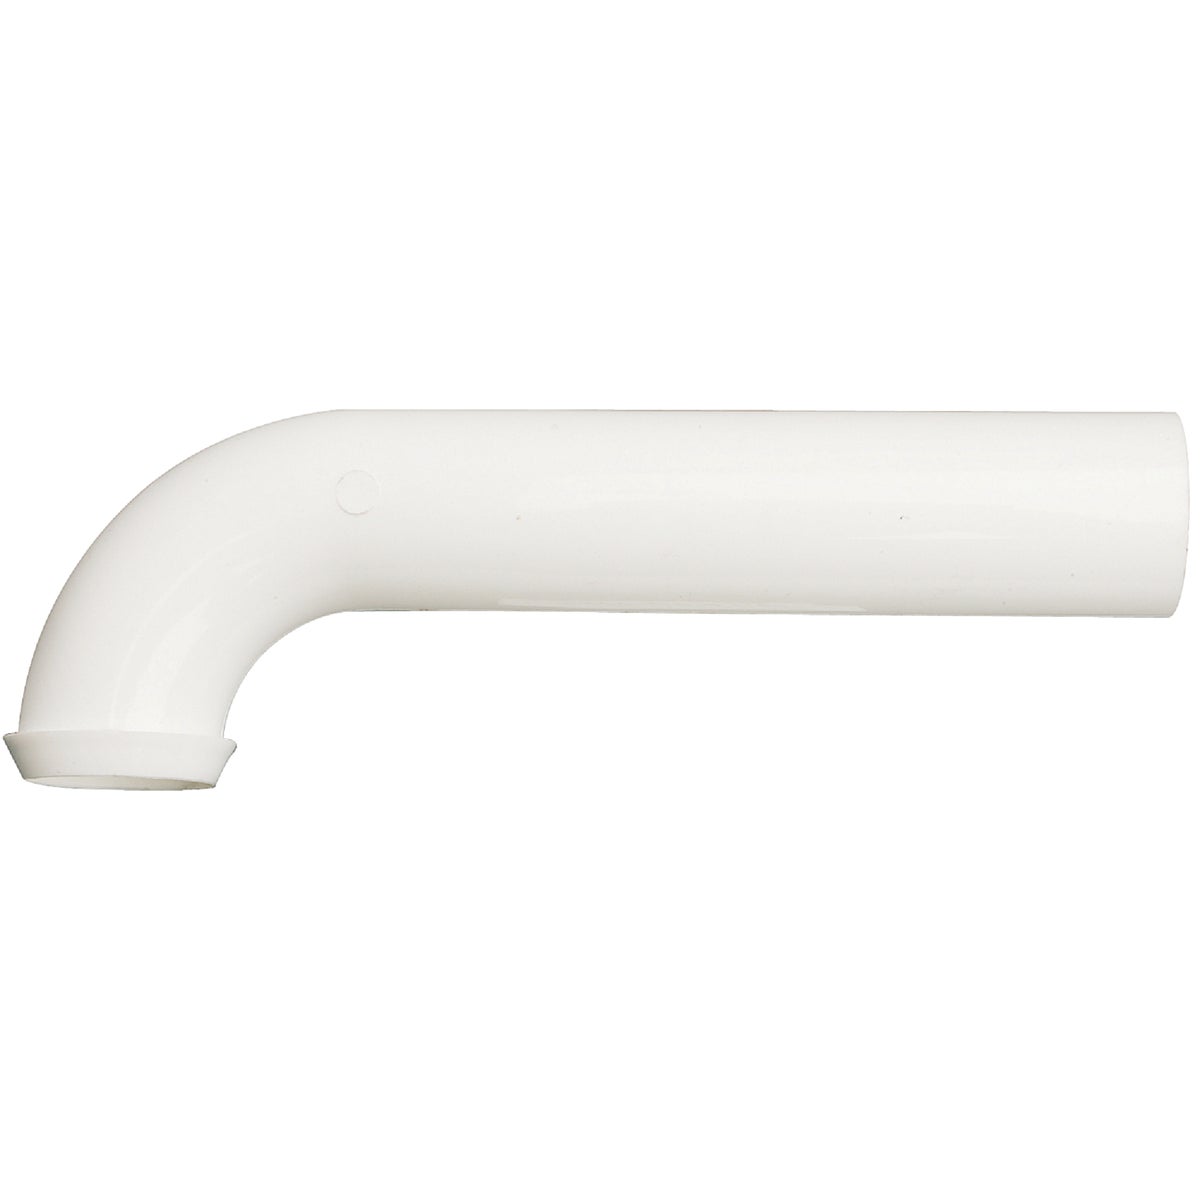 Item 448443, Do it plastic 7 In. wall tube. Easy installation.